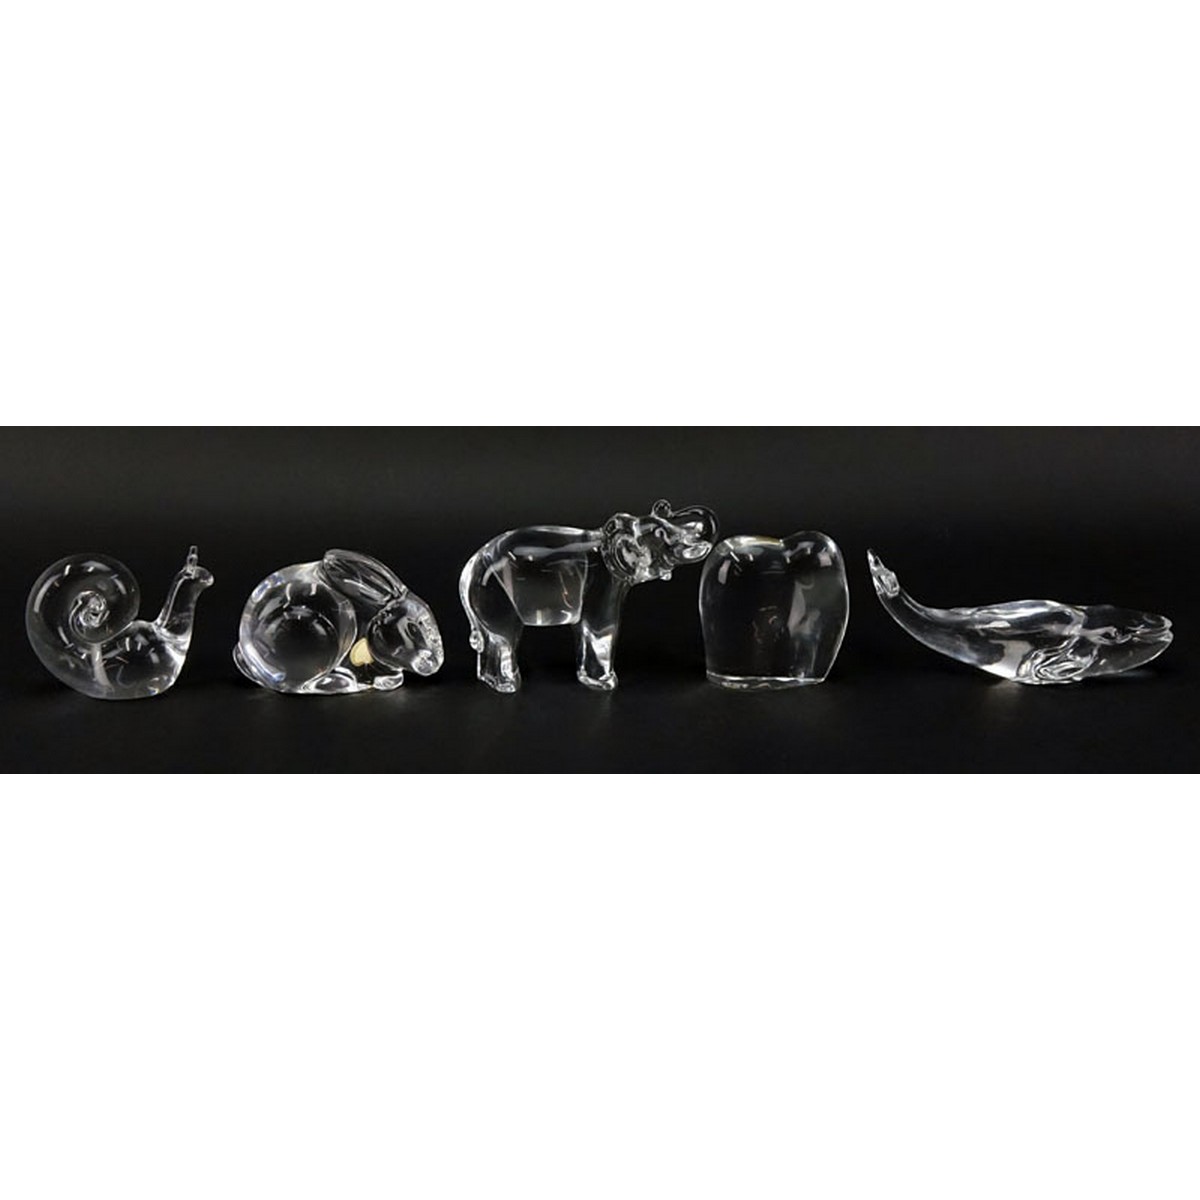 Grouping of Five (5) Paperweights: Baccarat Crystal Elephant, Baccarat Crystal Elephant with Trunk Up, Baccarat Crystal Whale, Steuben Crystal Snail, Val St. Lambert Crystal Rabbit.